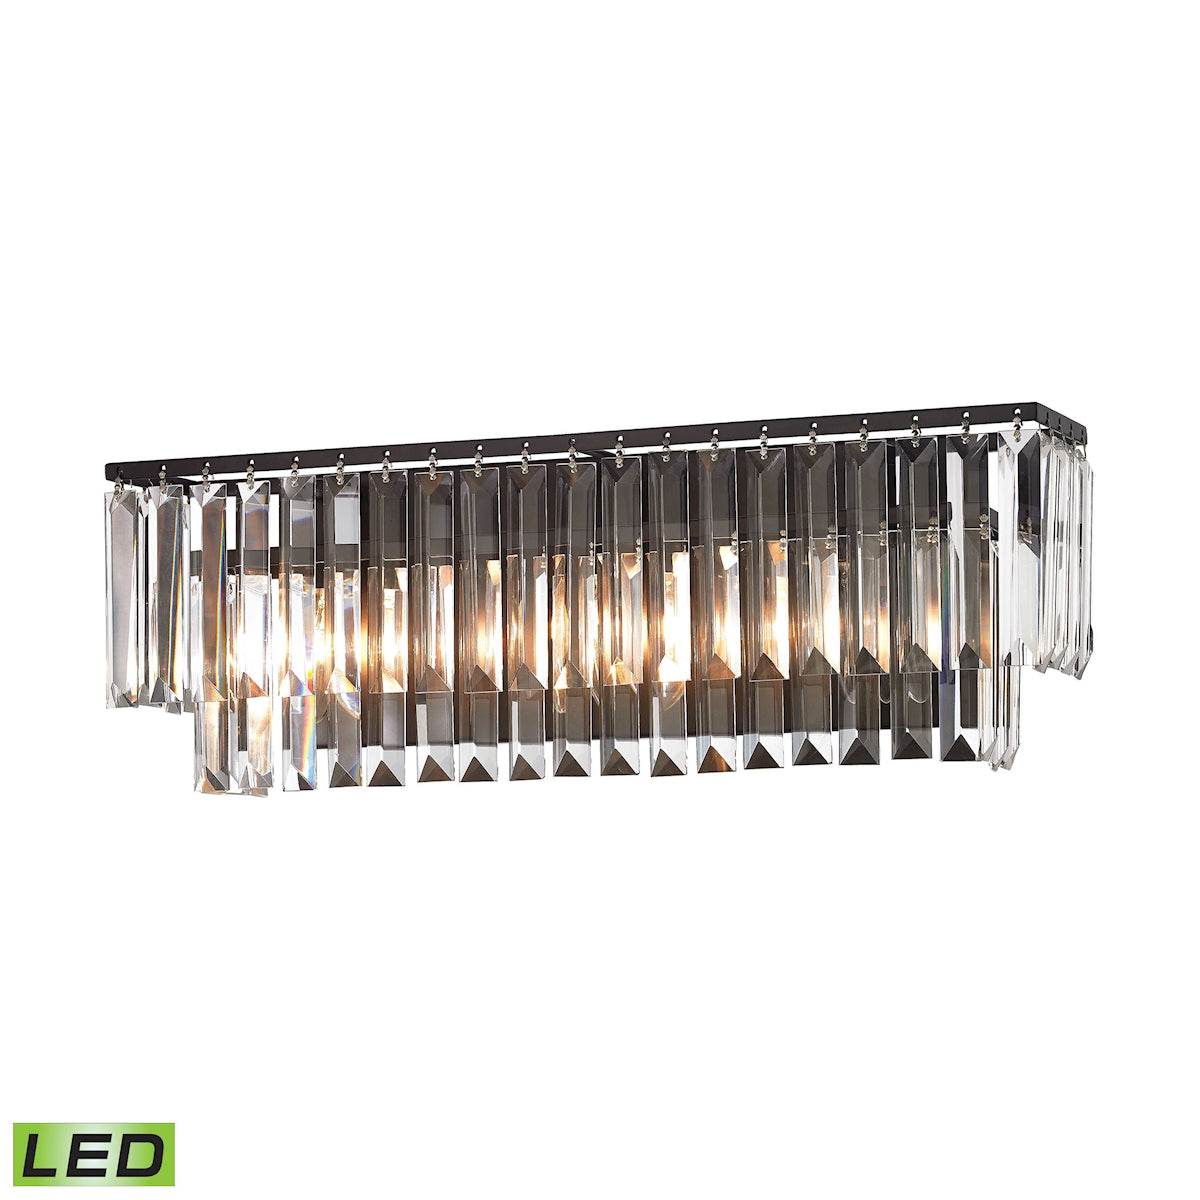 ELK Lighting 15222/3-LED - Palacial 3-Light Vanity Light in Oil Rubbed Bronze with Clear Crystal - I